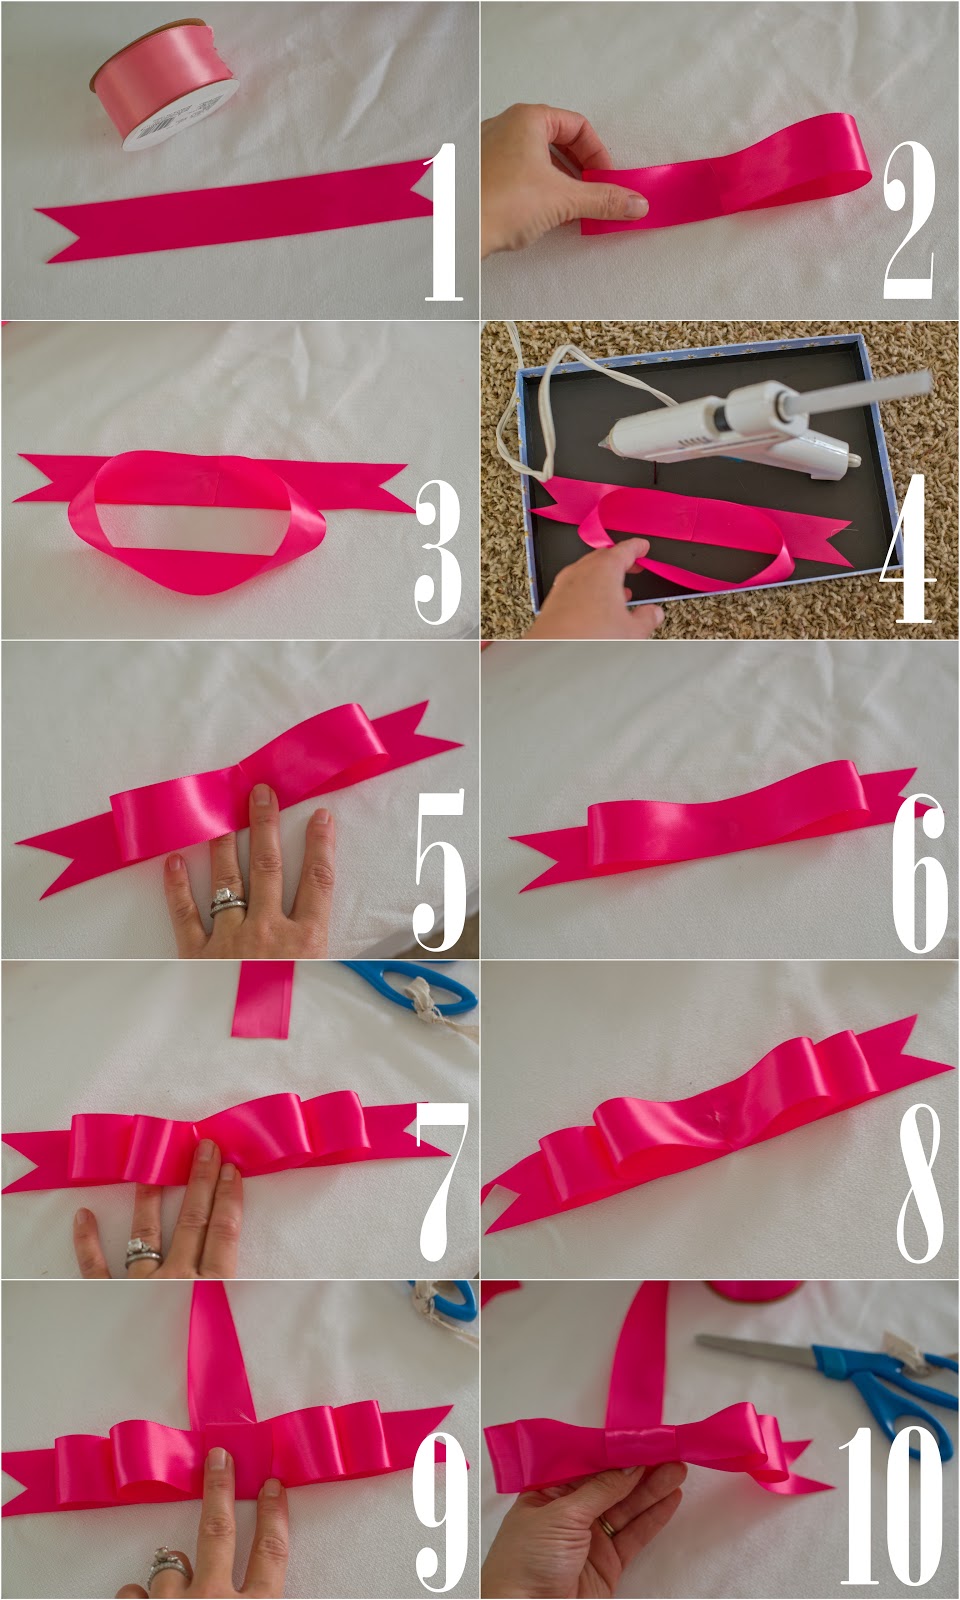 Hair Bow Tutorial / Bow out of Ribbon / How to Make Bows with Ribbon / #1  tutorial 